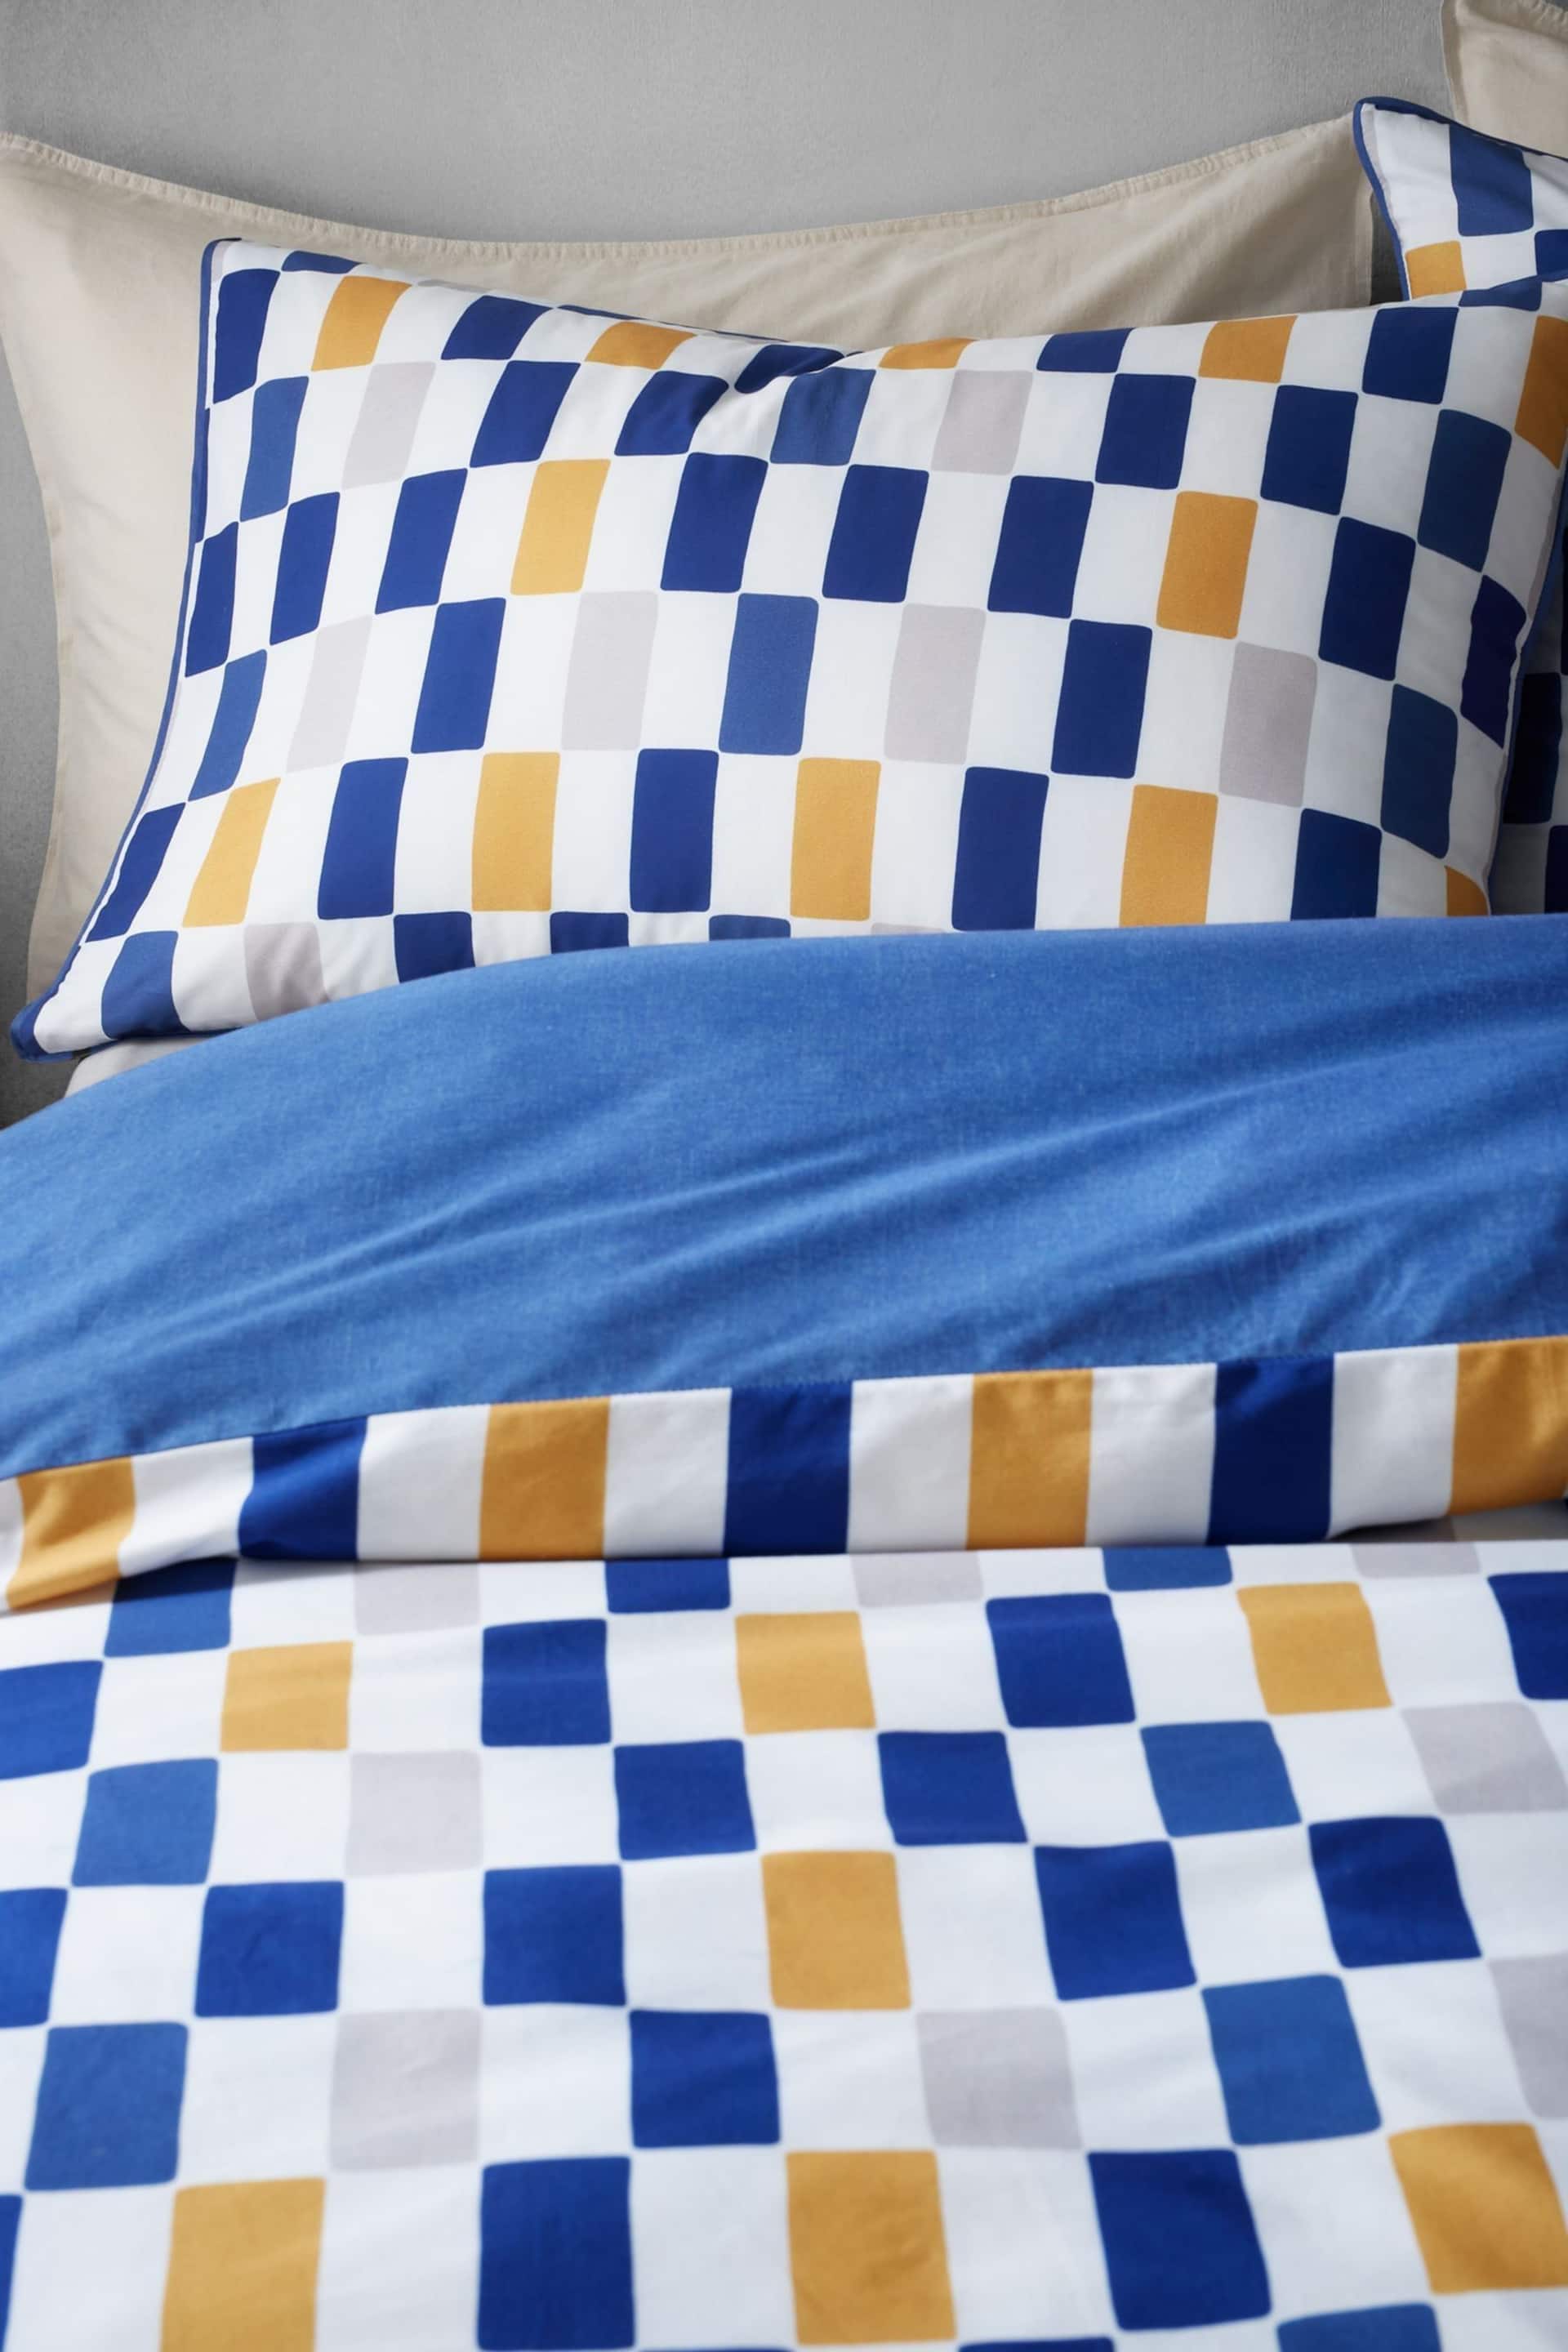 Content by Terence Conran Blue Oblong Checkerboard Cotton Duvet Cover Set - Image 2 of 4